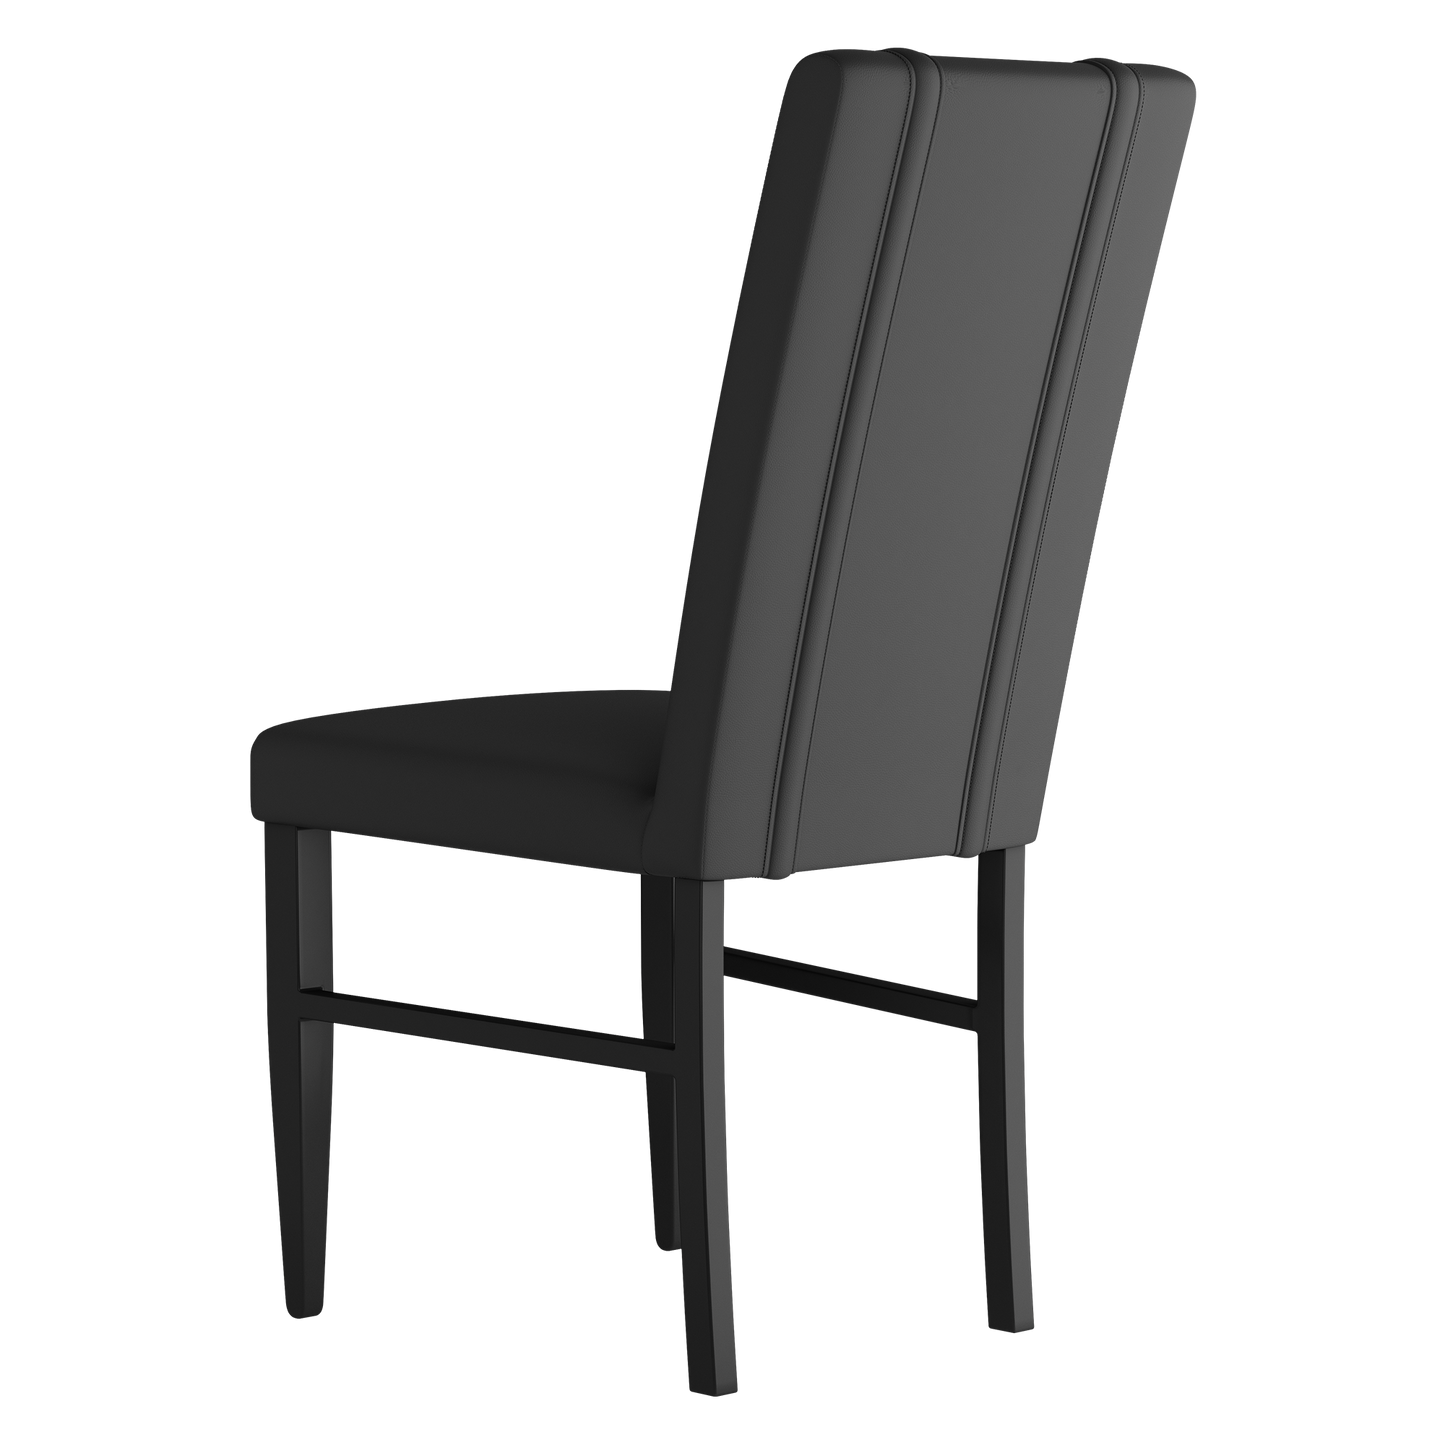 Side Chair 2000 with Celtics Crossover Gaming Wordmark White Set of 2 [CAN ONLY BE SHIPPED TO MASSACHUSETTS]